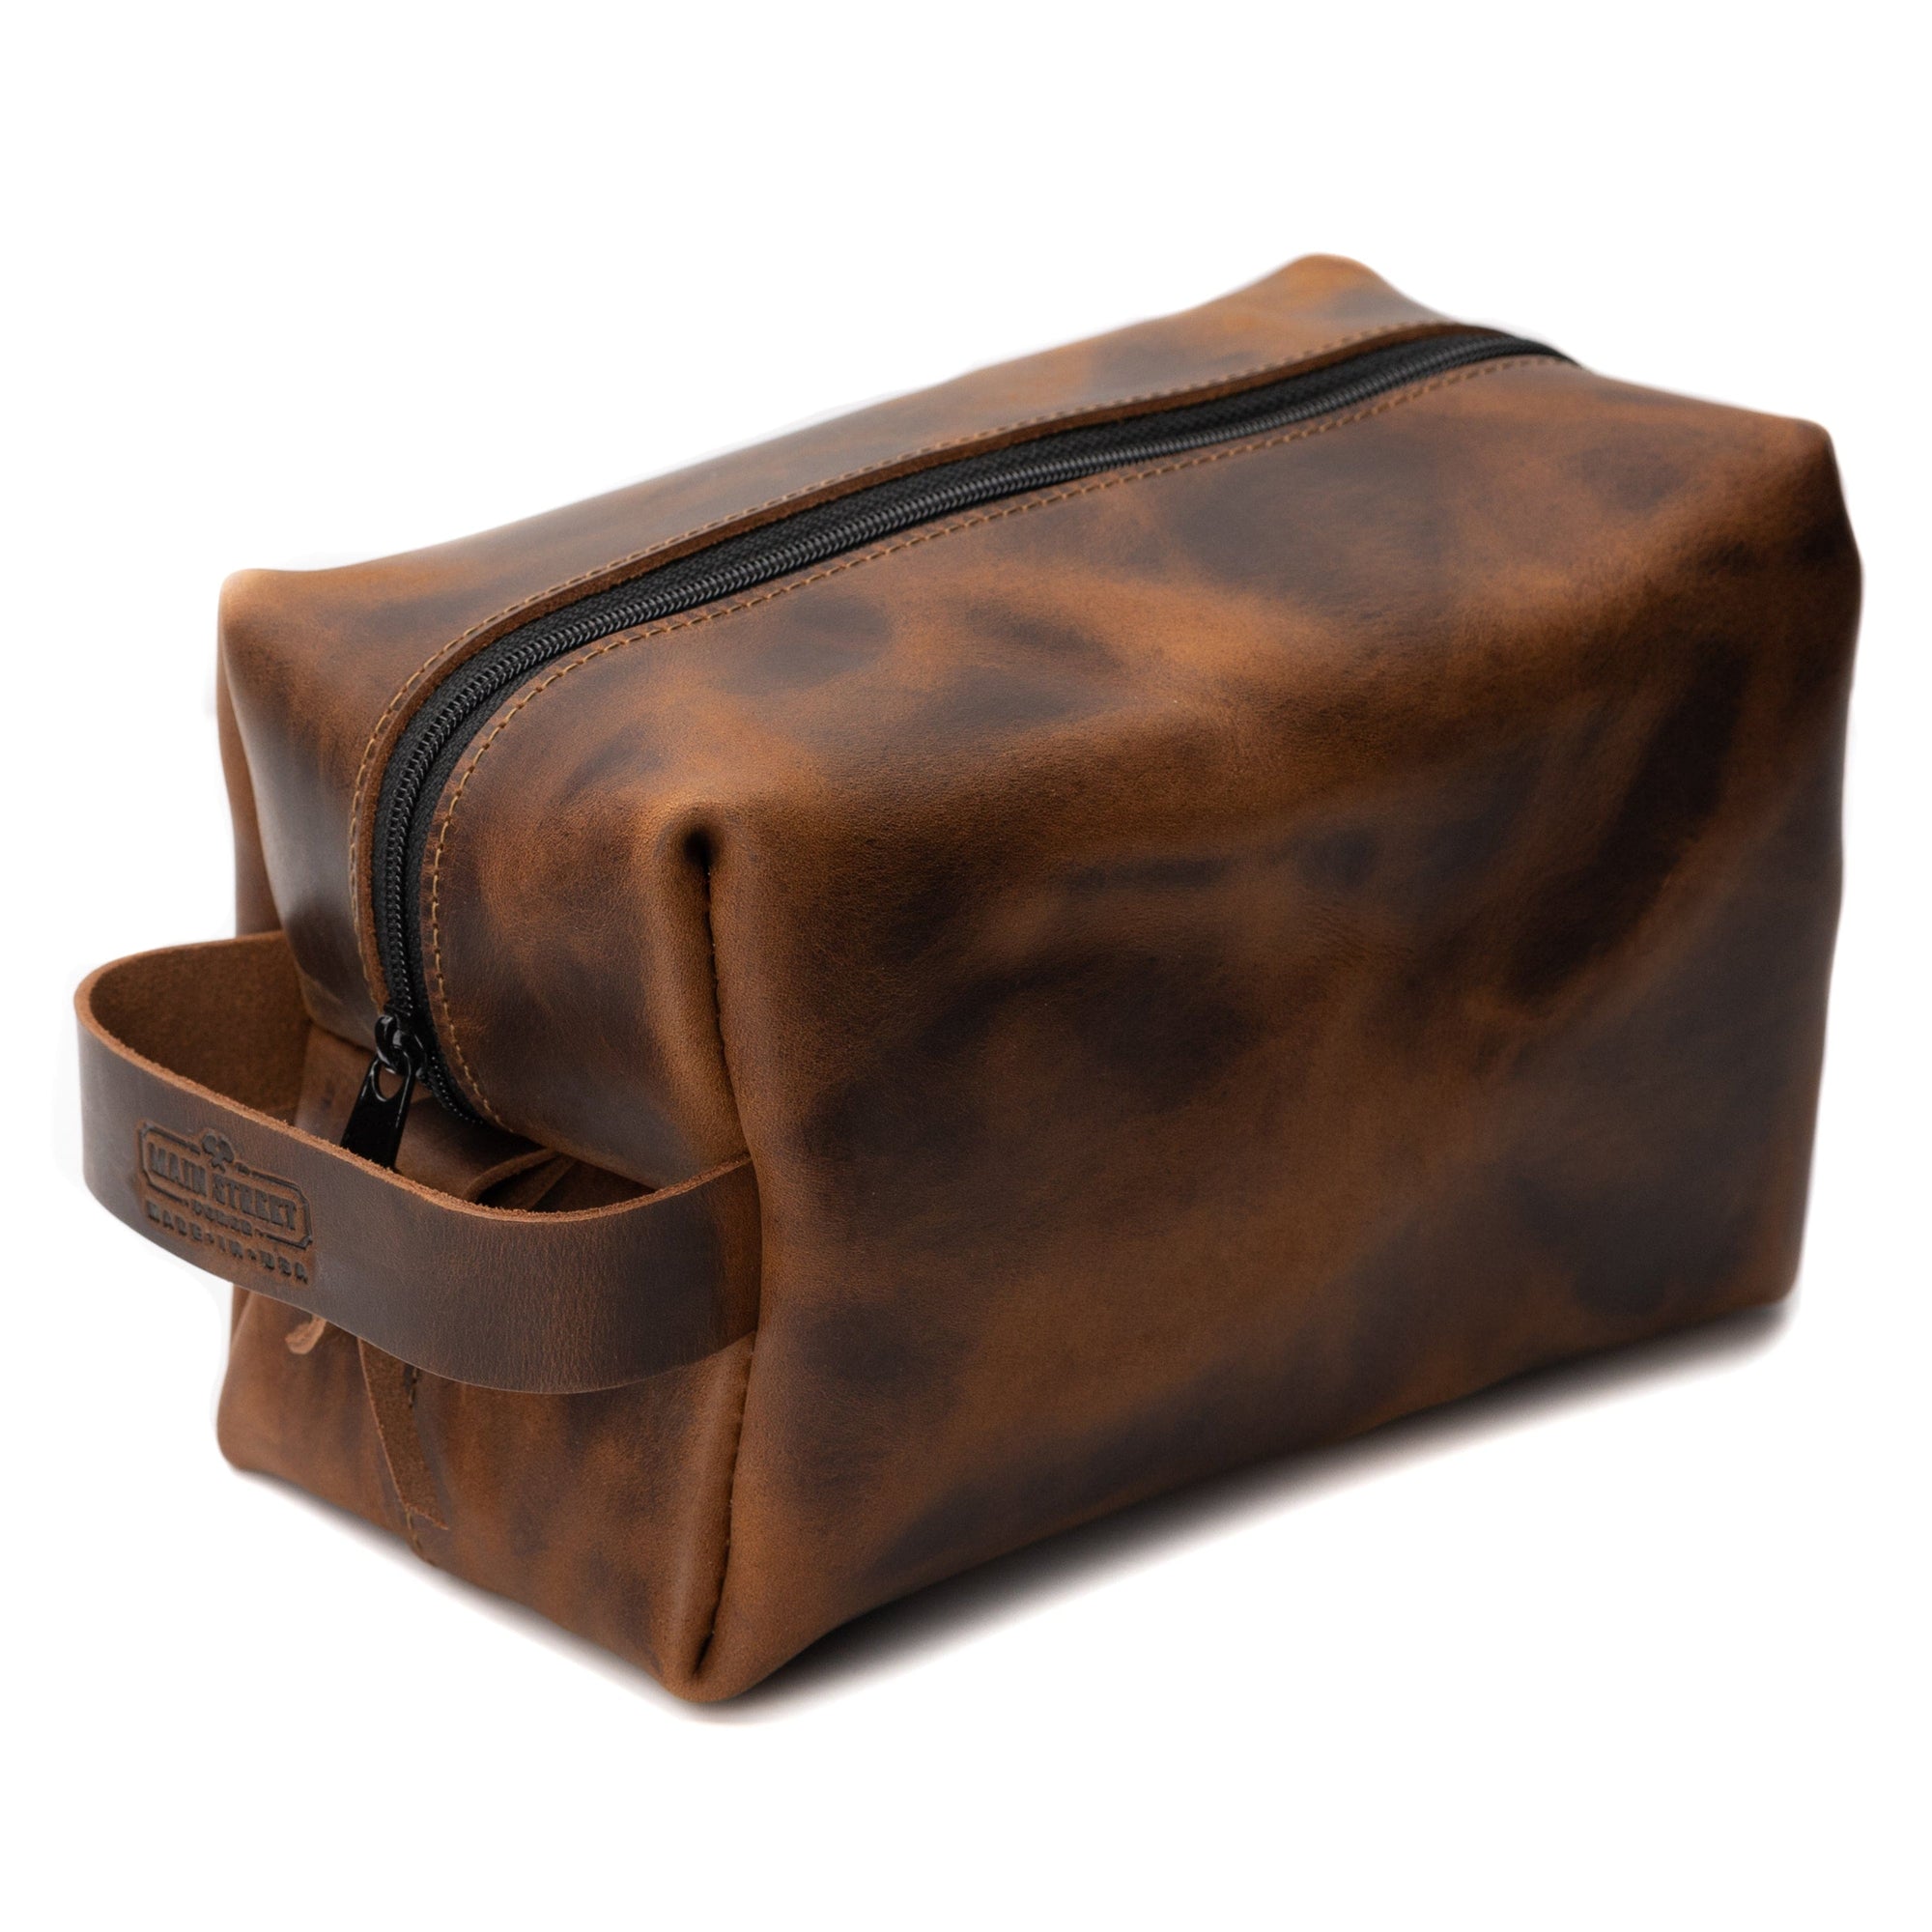 https://mainstreetforge.com/cdn/shop/products/premium-full-grain-leather-toiletry-bag-for-men-made-in-usa-travel-pack-for-shaving-essentials-accessories-compact-lightweight-mens-bathroom-shower-case-main-street-forge-bootlegger-b_2000x.jpg?v=1649259755